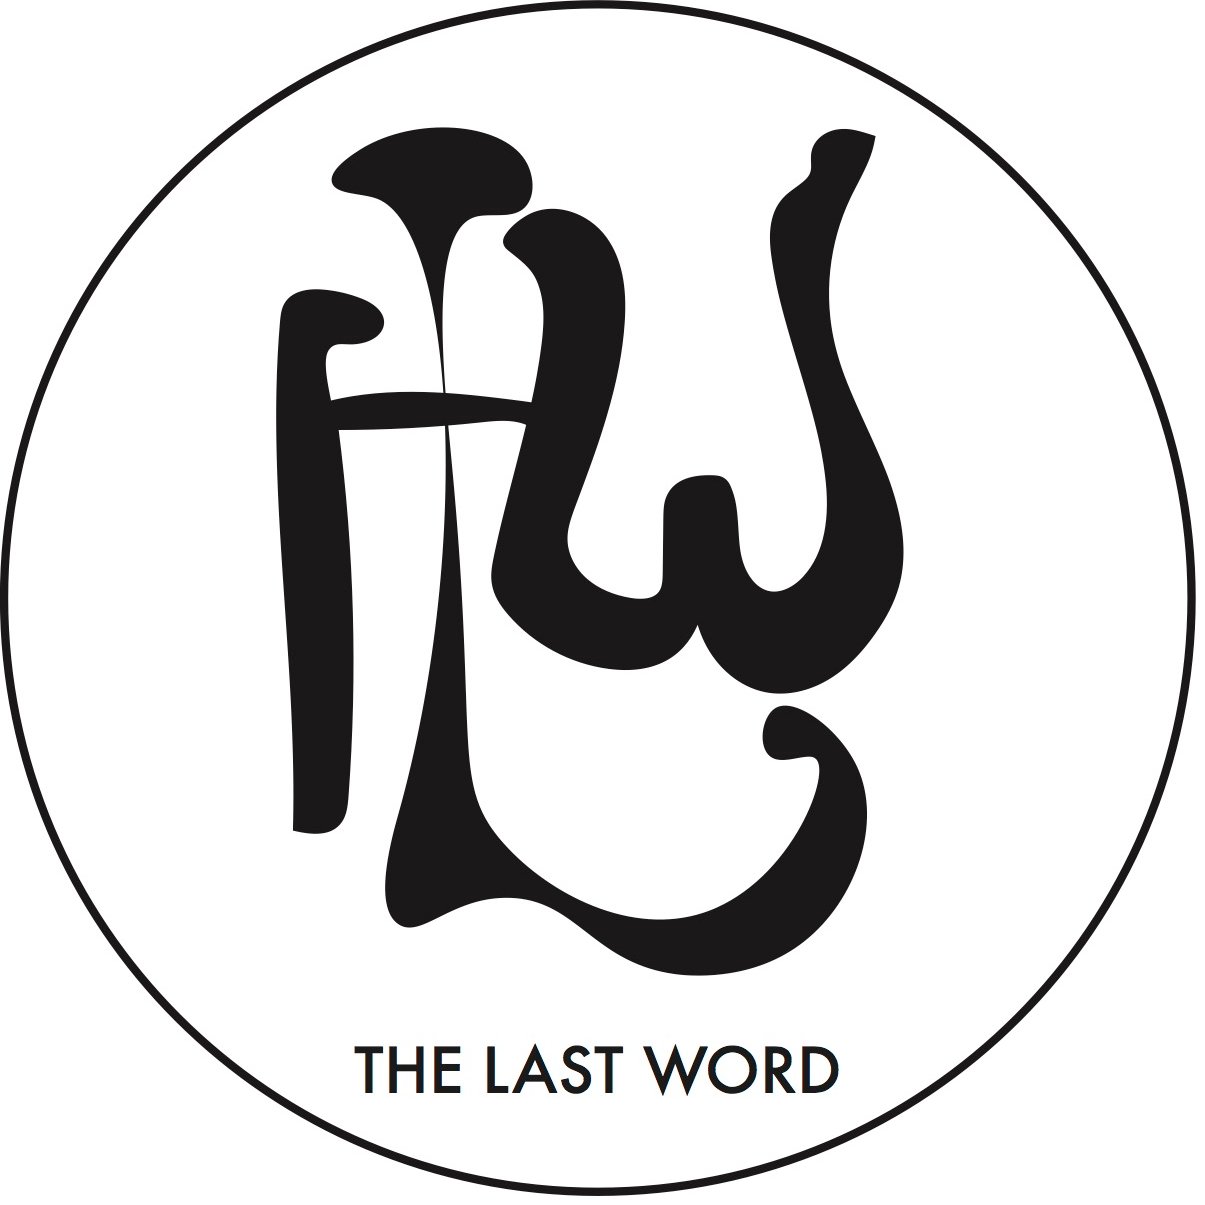 The Last Word anthology is being produced by the third year students of the Bachelor of Writing and Publishing, 2017.